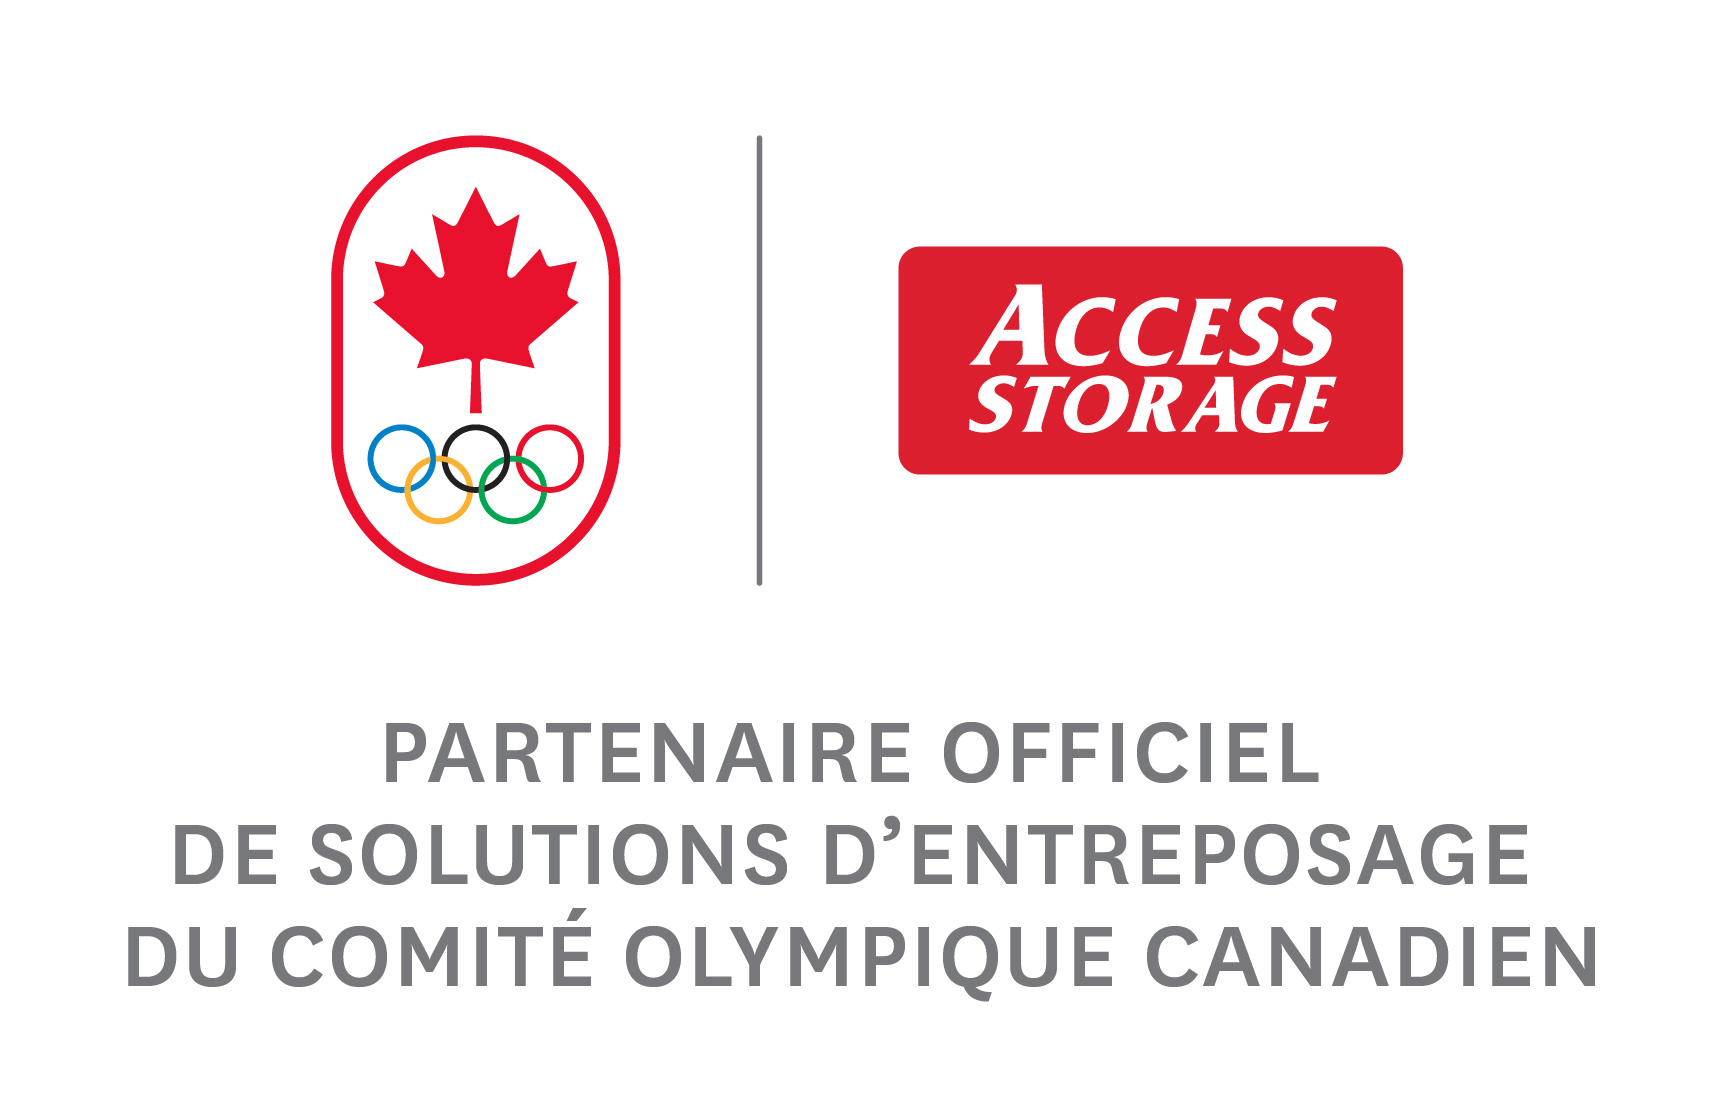 OFFICIAL STORAGE PARTNER OF THE CANADIAN OLYMPIC COMMITTEE